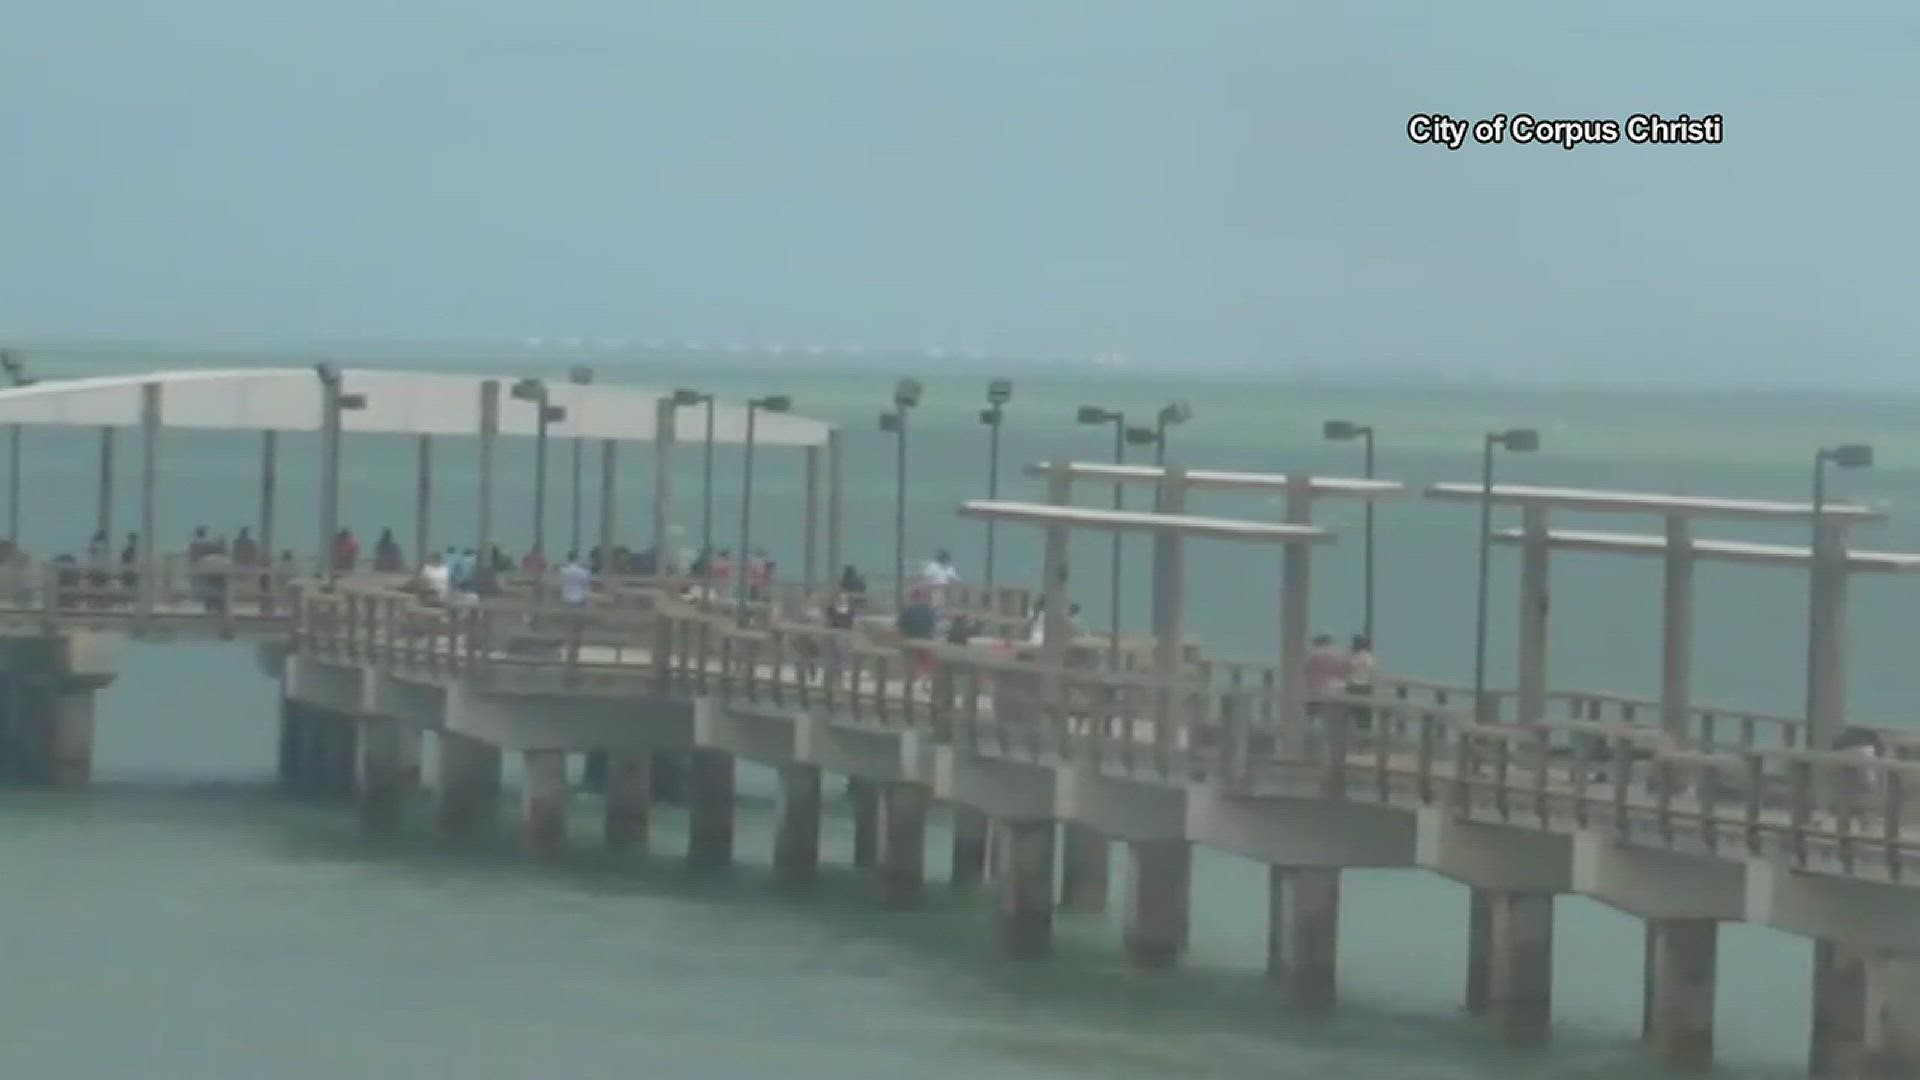 The man was charged after video showed him intentionally jumping from the pier.